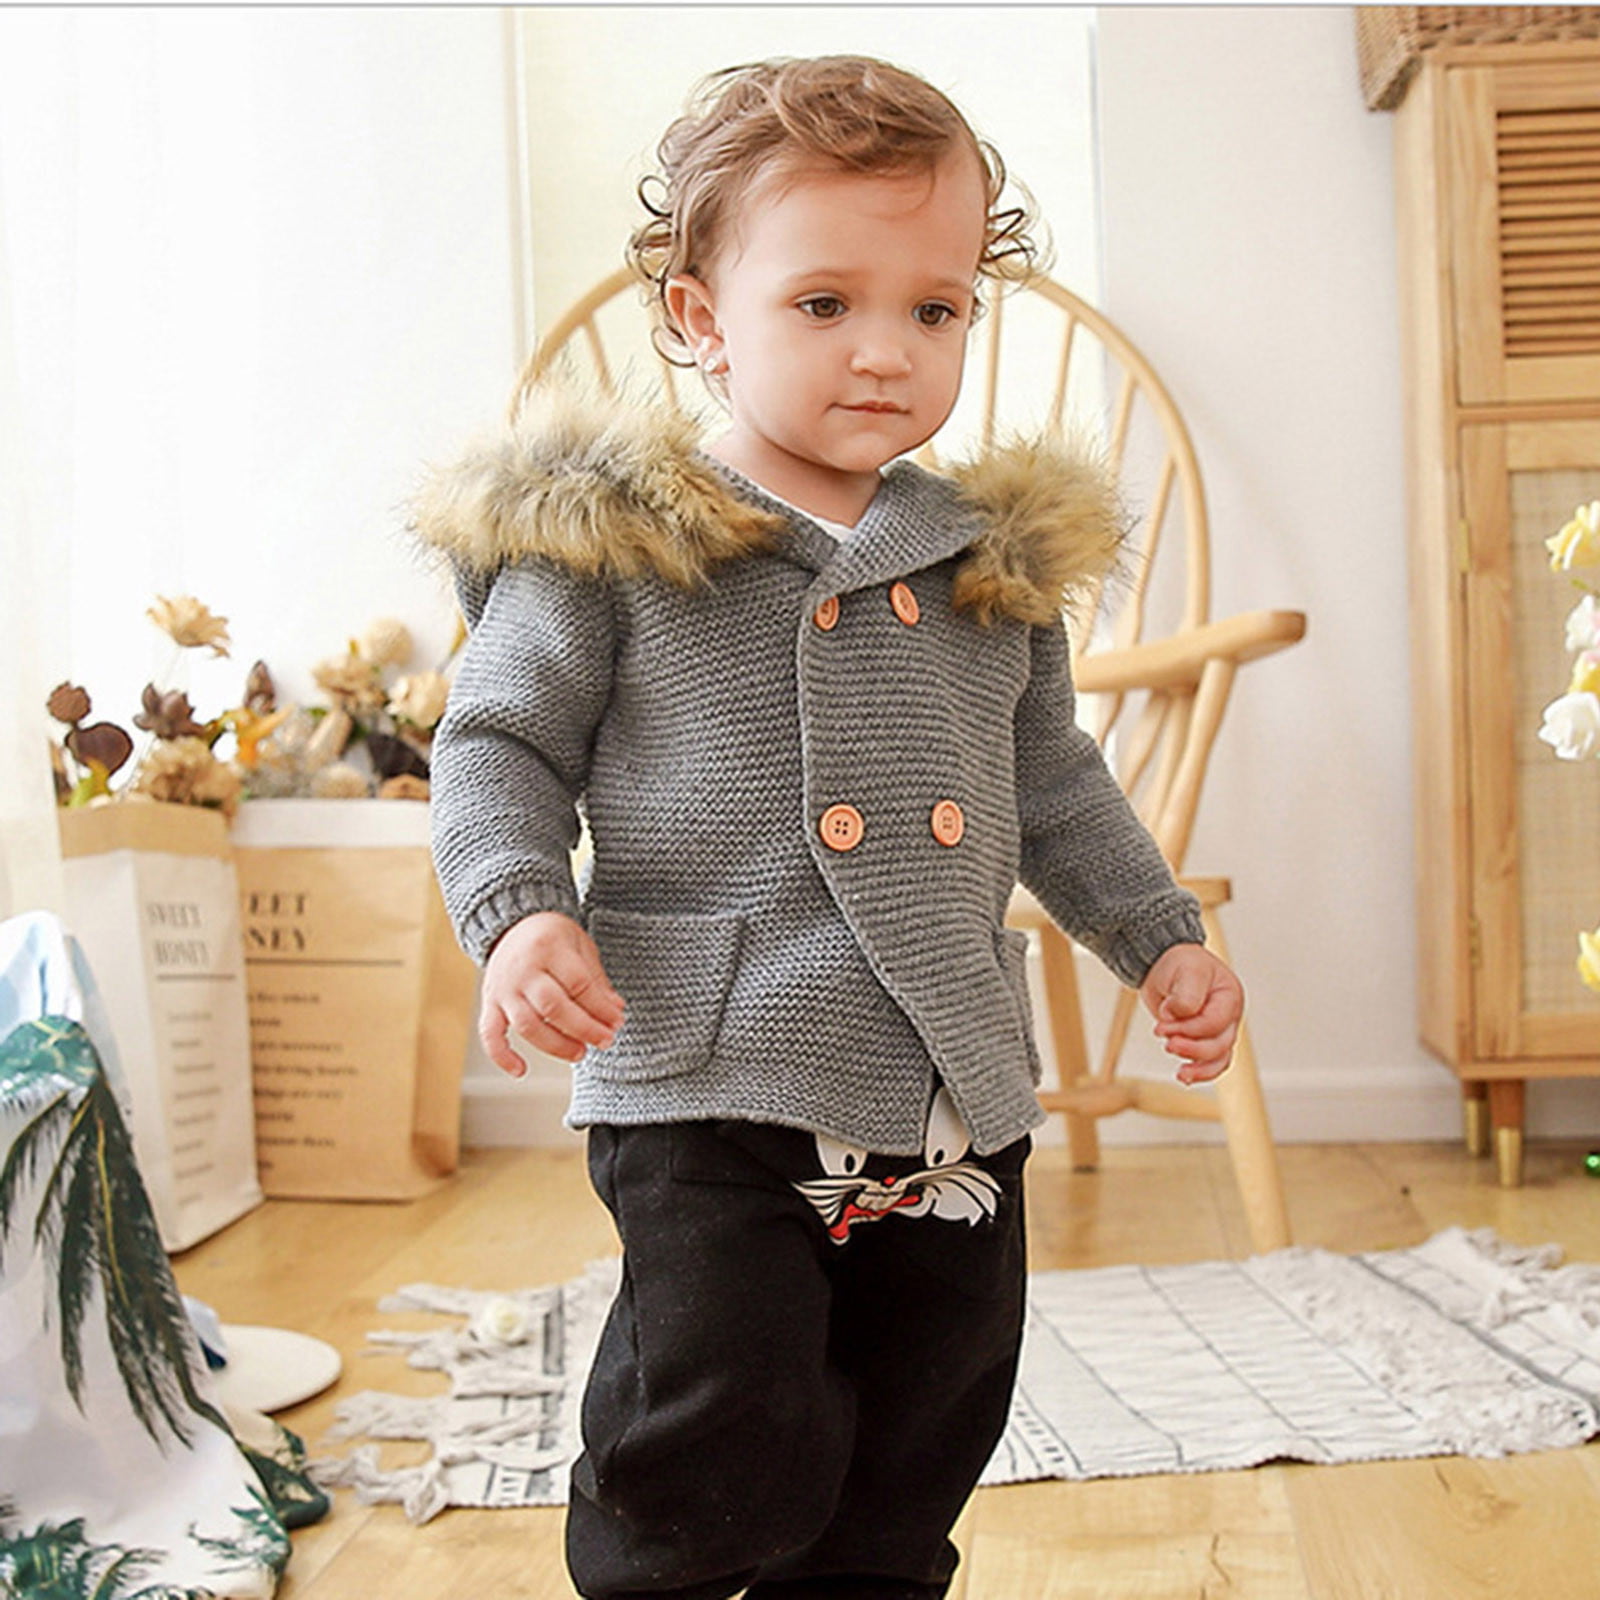 Baby Puffer Jacket Winter Hooded Coat Lightweight Down Outerwear Cartoon Animal Print Cute Baby Girls Boys Kids Winter Jackets Padded Coat Warm Baby Outfits Windproof Overcoat Trench Coat Snowsuit 